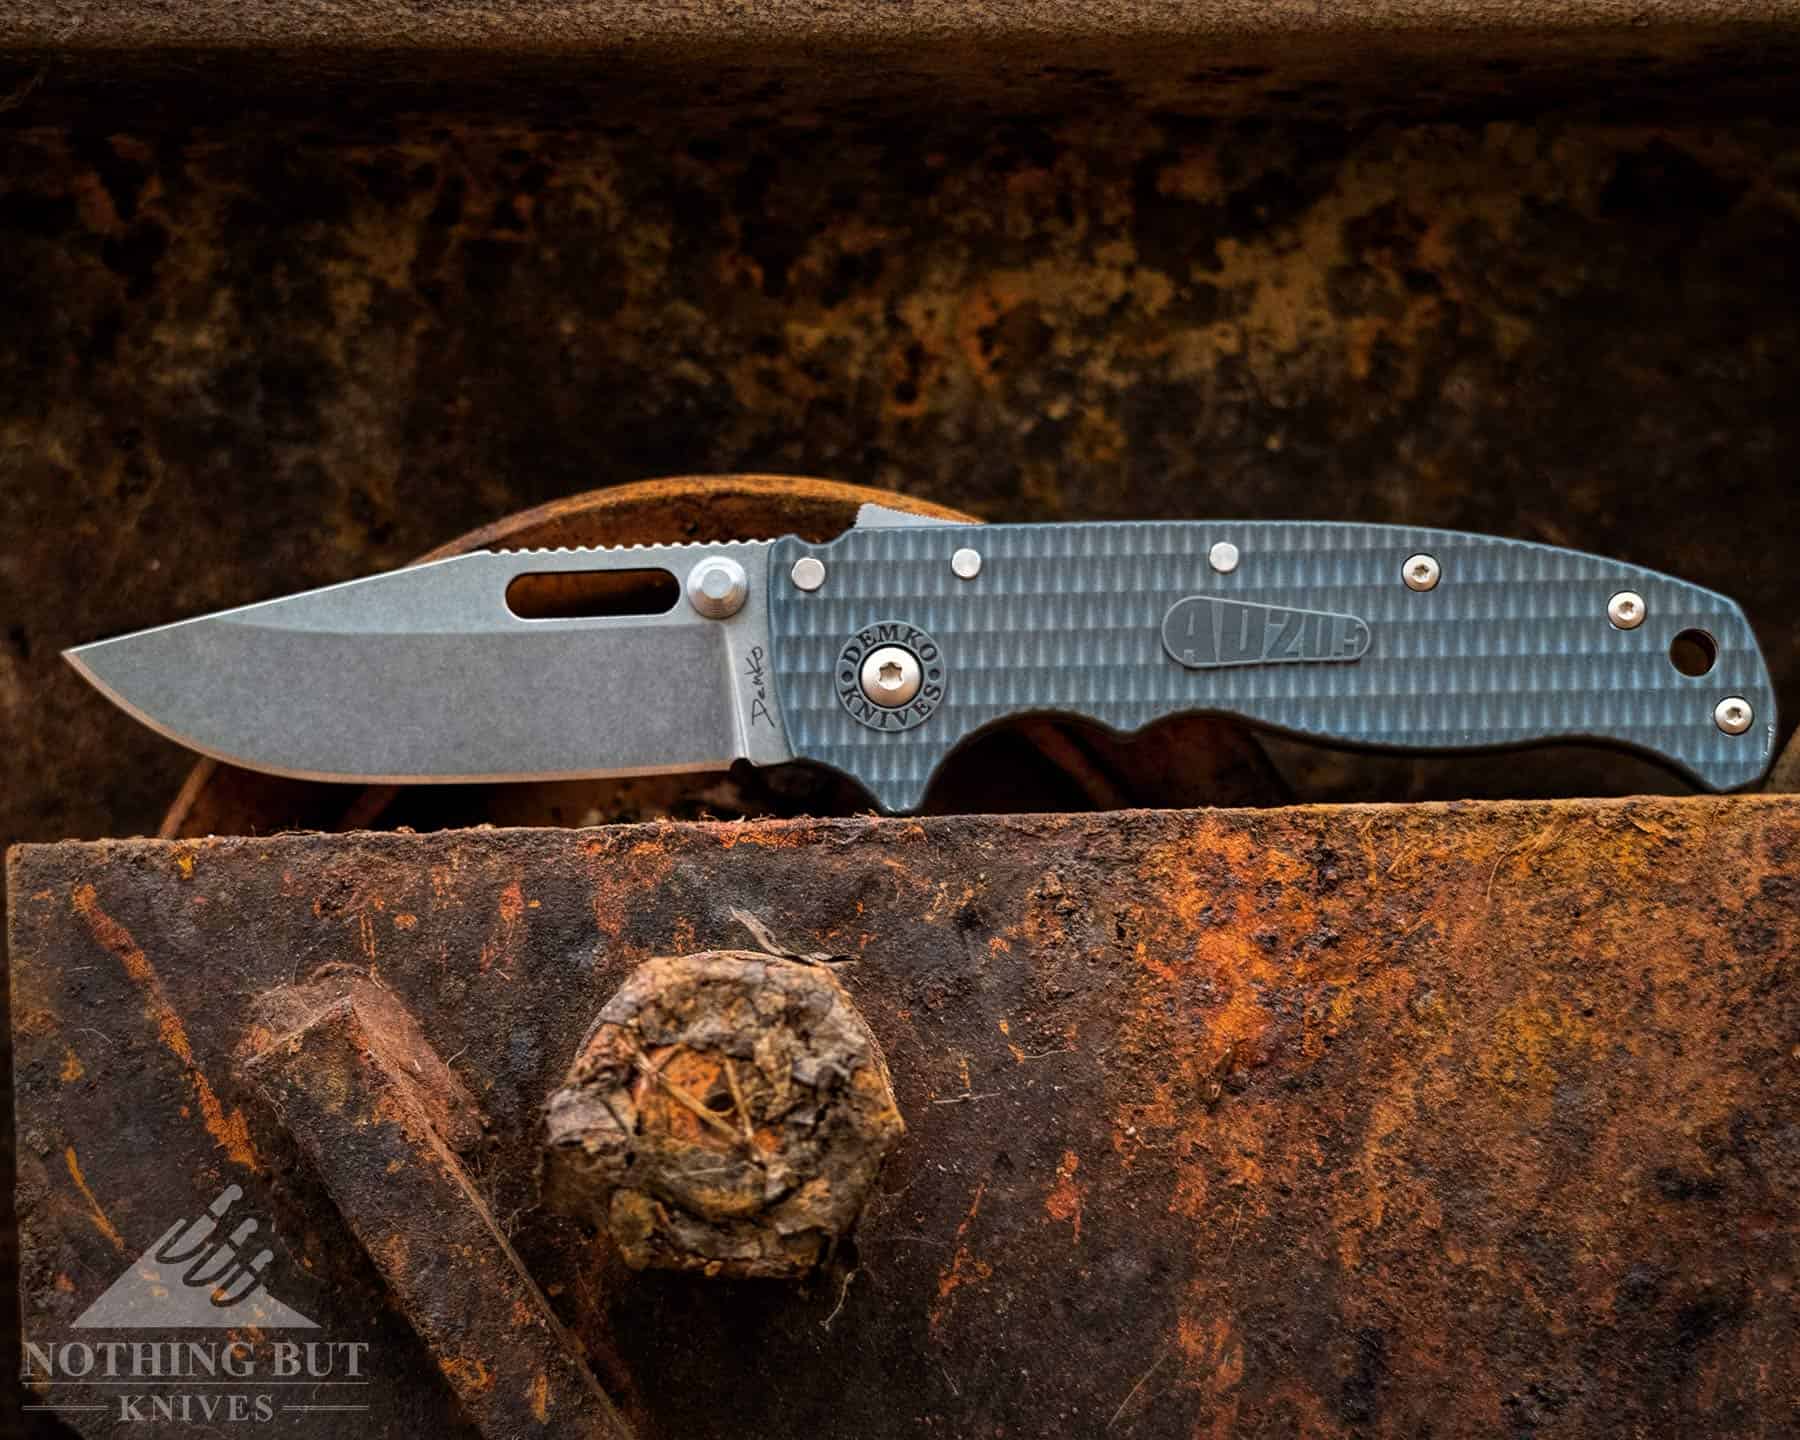 Header image for our in-depth review of the Demko 20.5 pocket knife featuring the knife in the open position on a runty steel I beam.